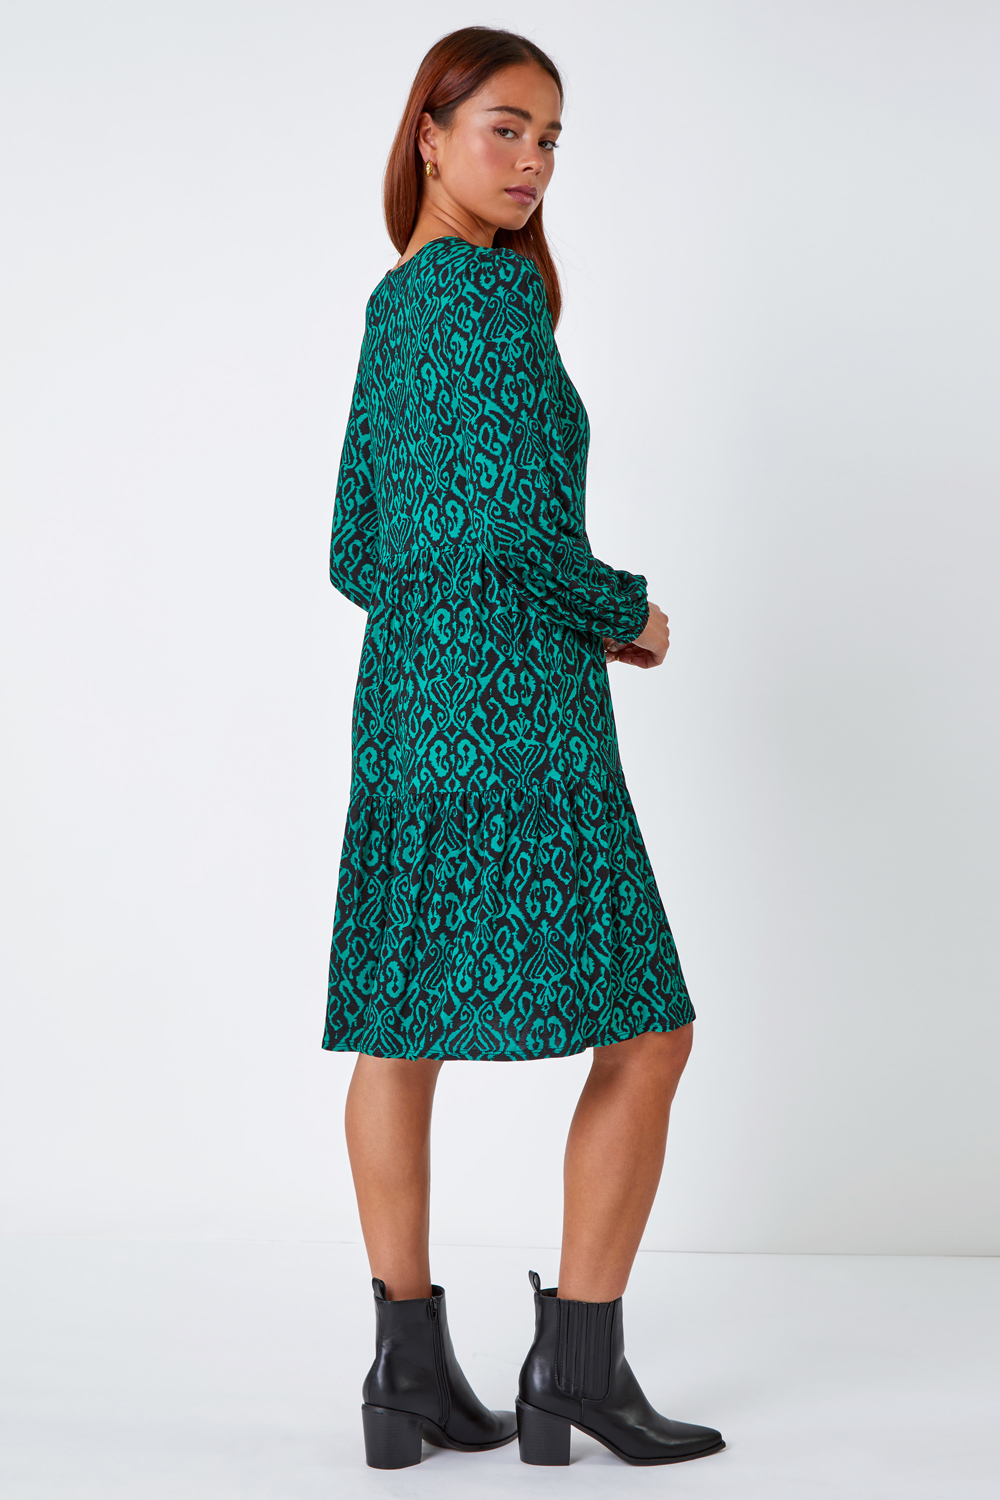 Green Petite Aztec Print Tiered Stretch Dress , Image 3 of 5